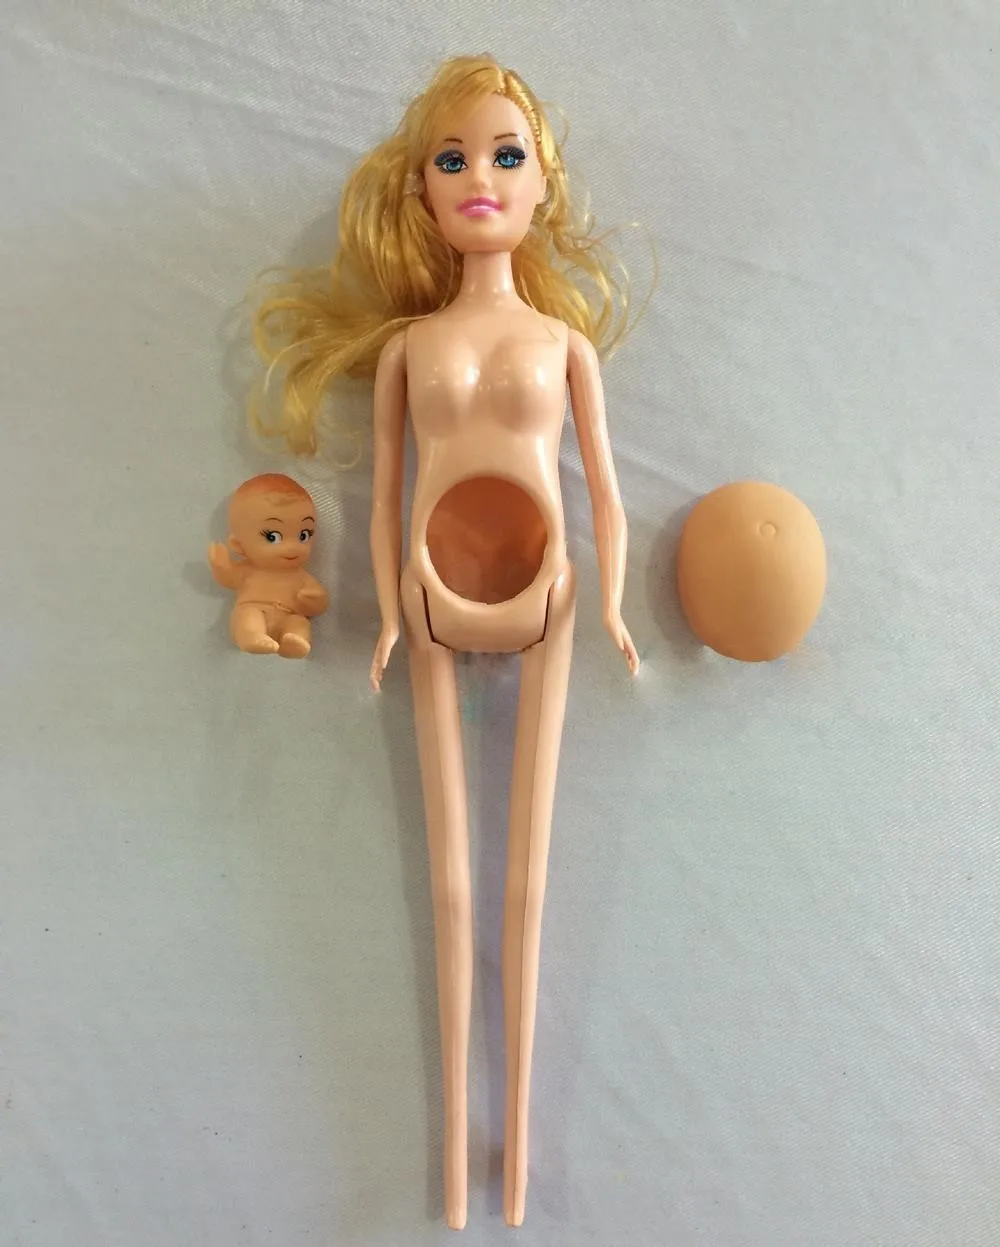 Real Pregnant Doll Mommy Doll Have A baby In Her Tummy Child Role Play Doll 